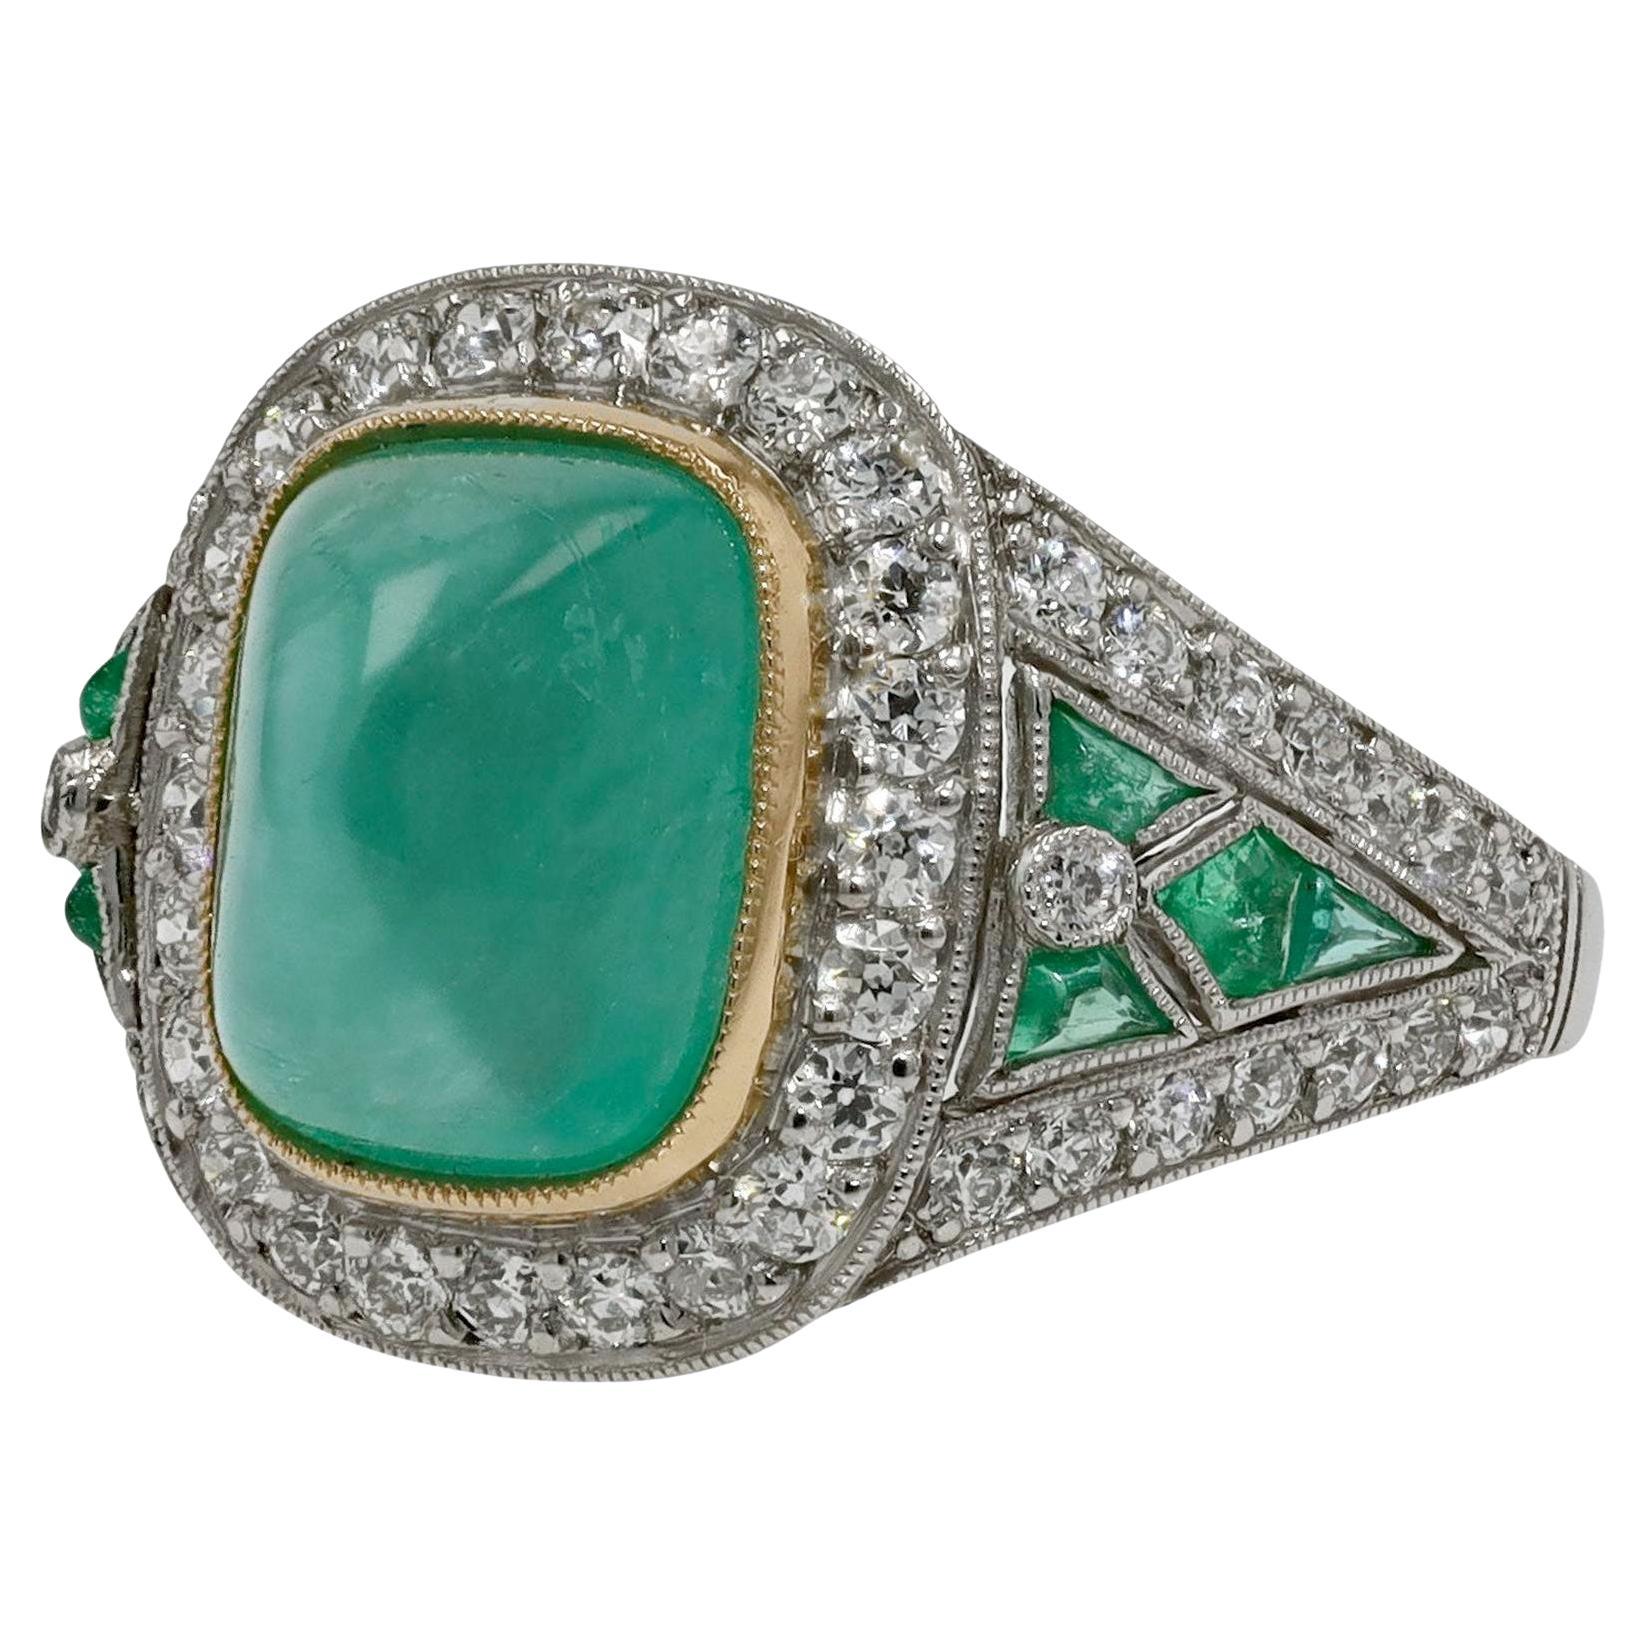 4 Carat Sugar Loaf Colombian Emerald Art Deco Cocktail Ring For Sale